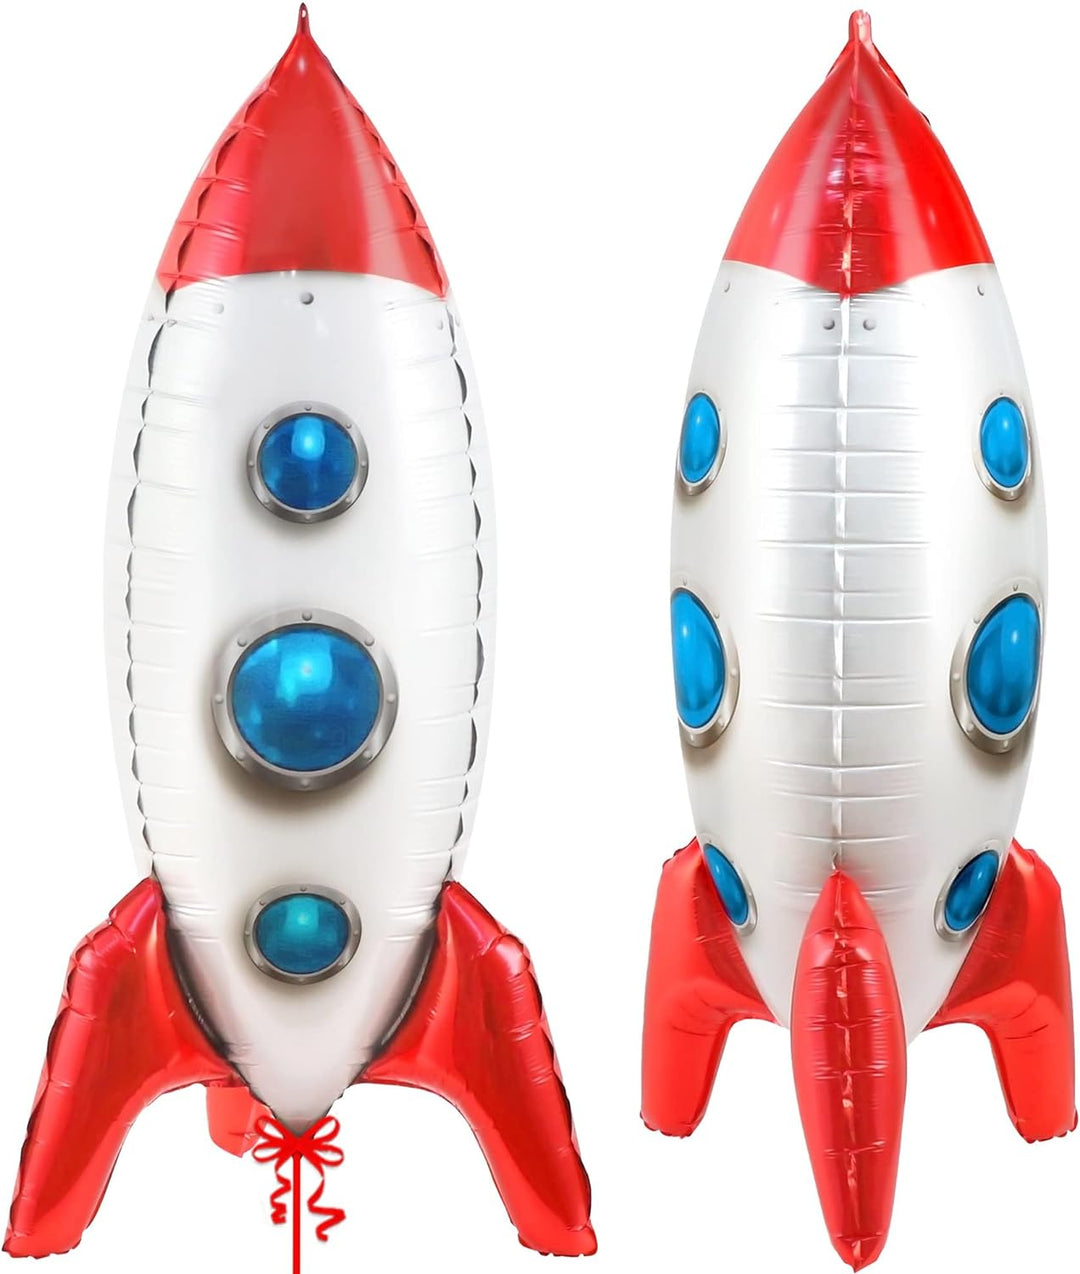 KatchOn, Large Rocket Balloon for Kids - 33 Inch, Pack of 1 | Spaceship Balloon for Space Party Decorations | Space Balloons, Galaxy Party Decor | Rocket Mylar Balloon for Rocket Birthday Decorations